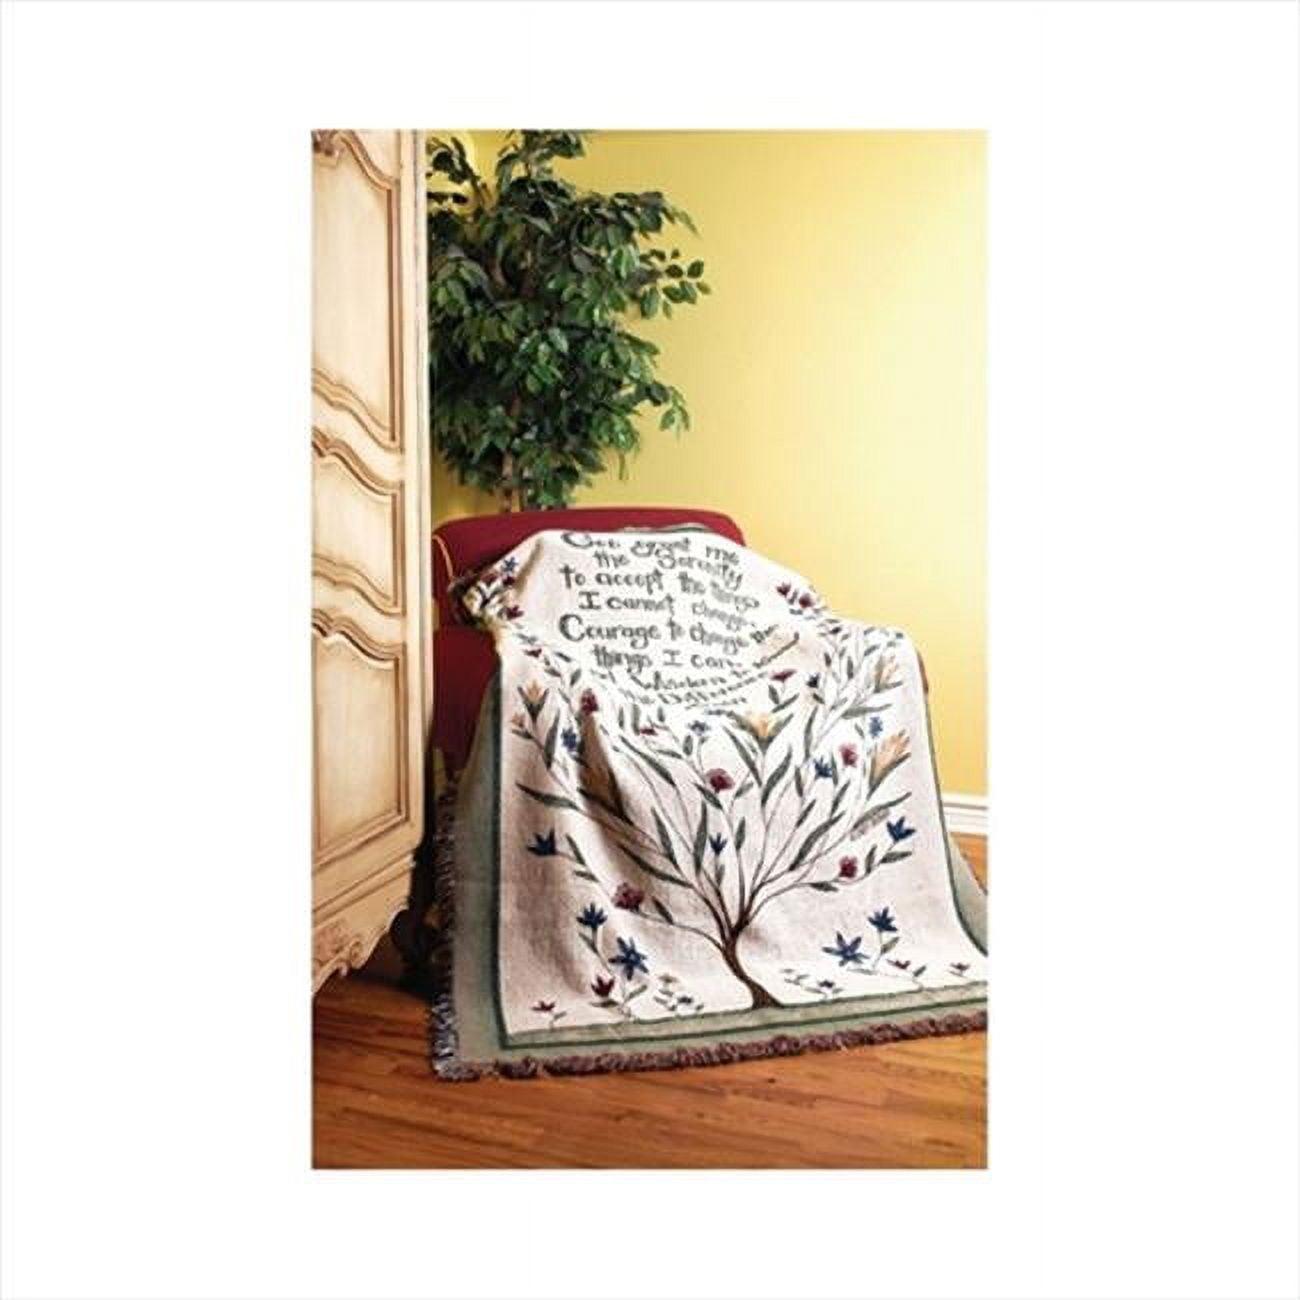 Serenity Prayer Multicolored Cotton Jacquard Tapestry Throw Blanket 50" x 60"